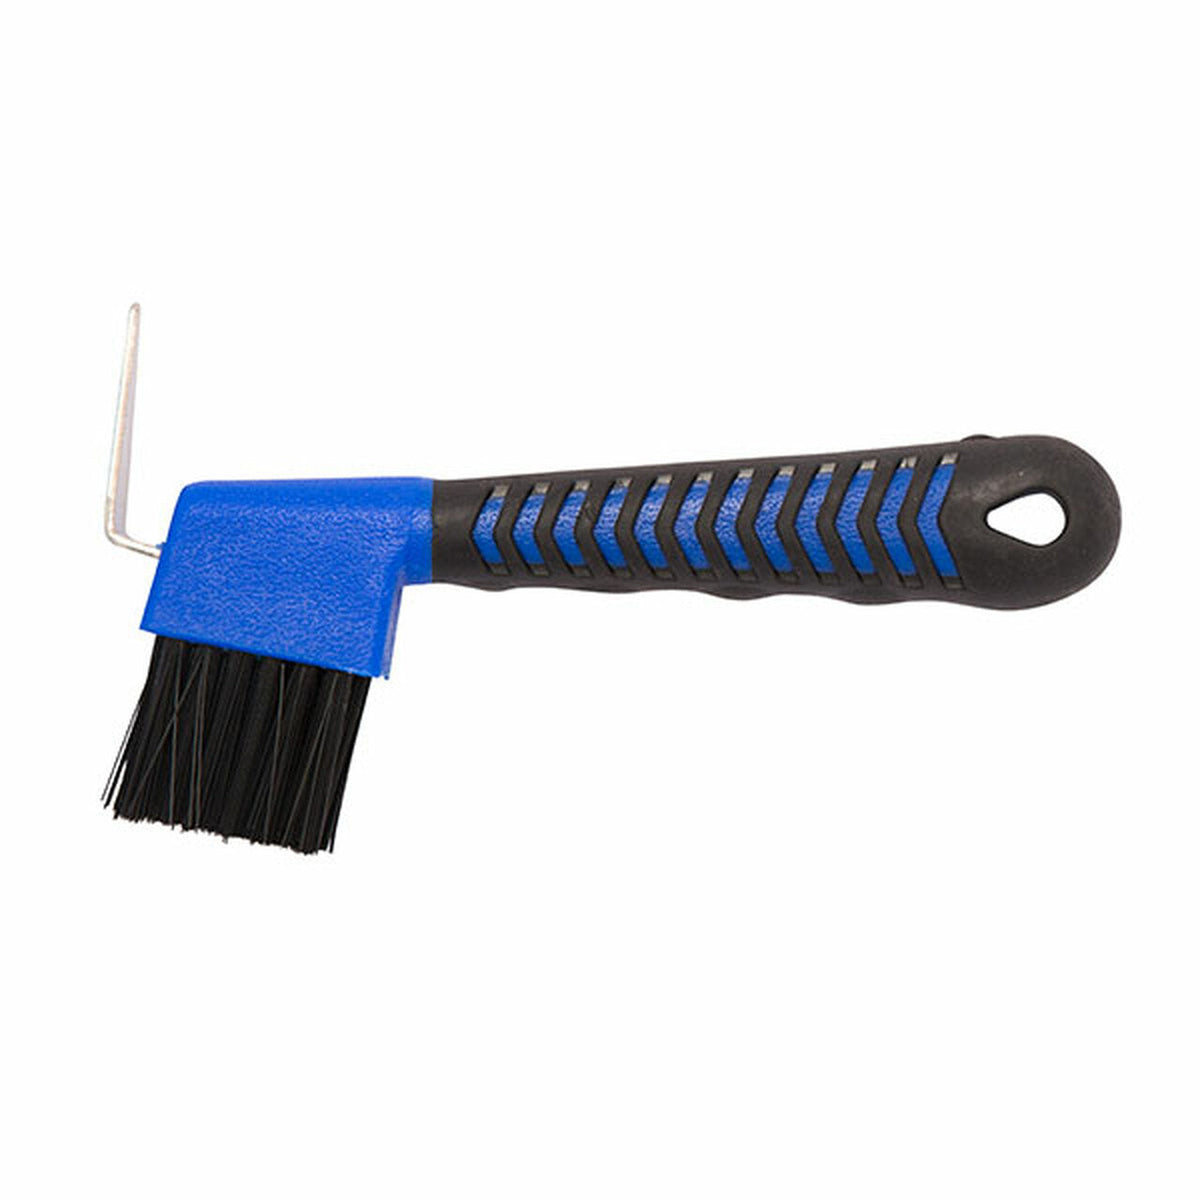 Side view of blue hoof pick with black shaped handle and bristles.